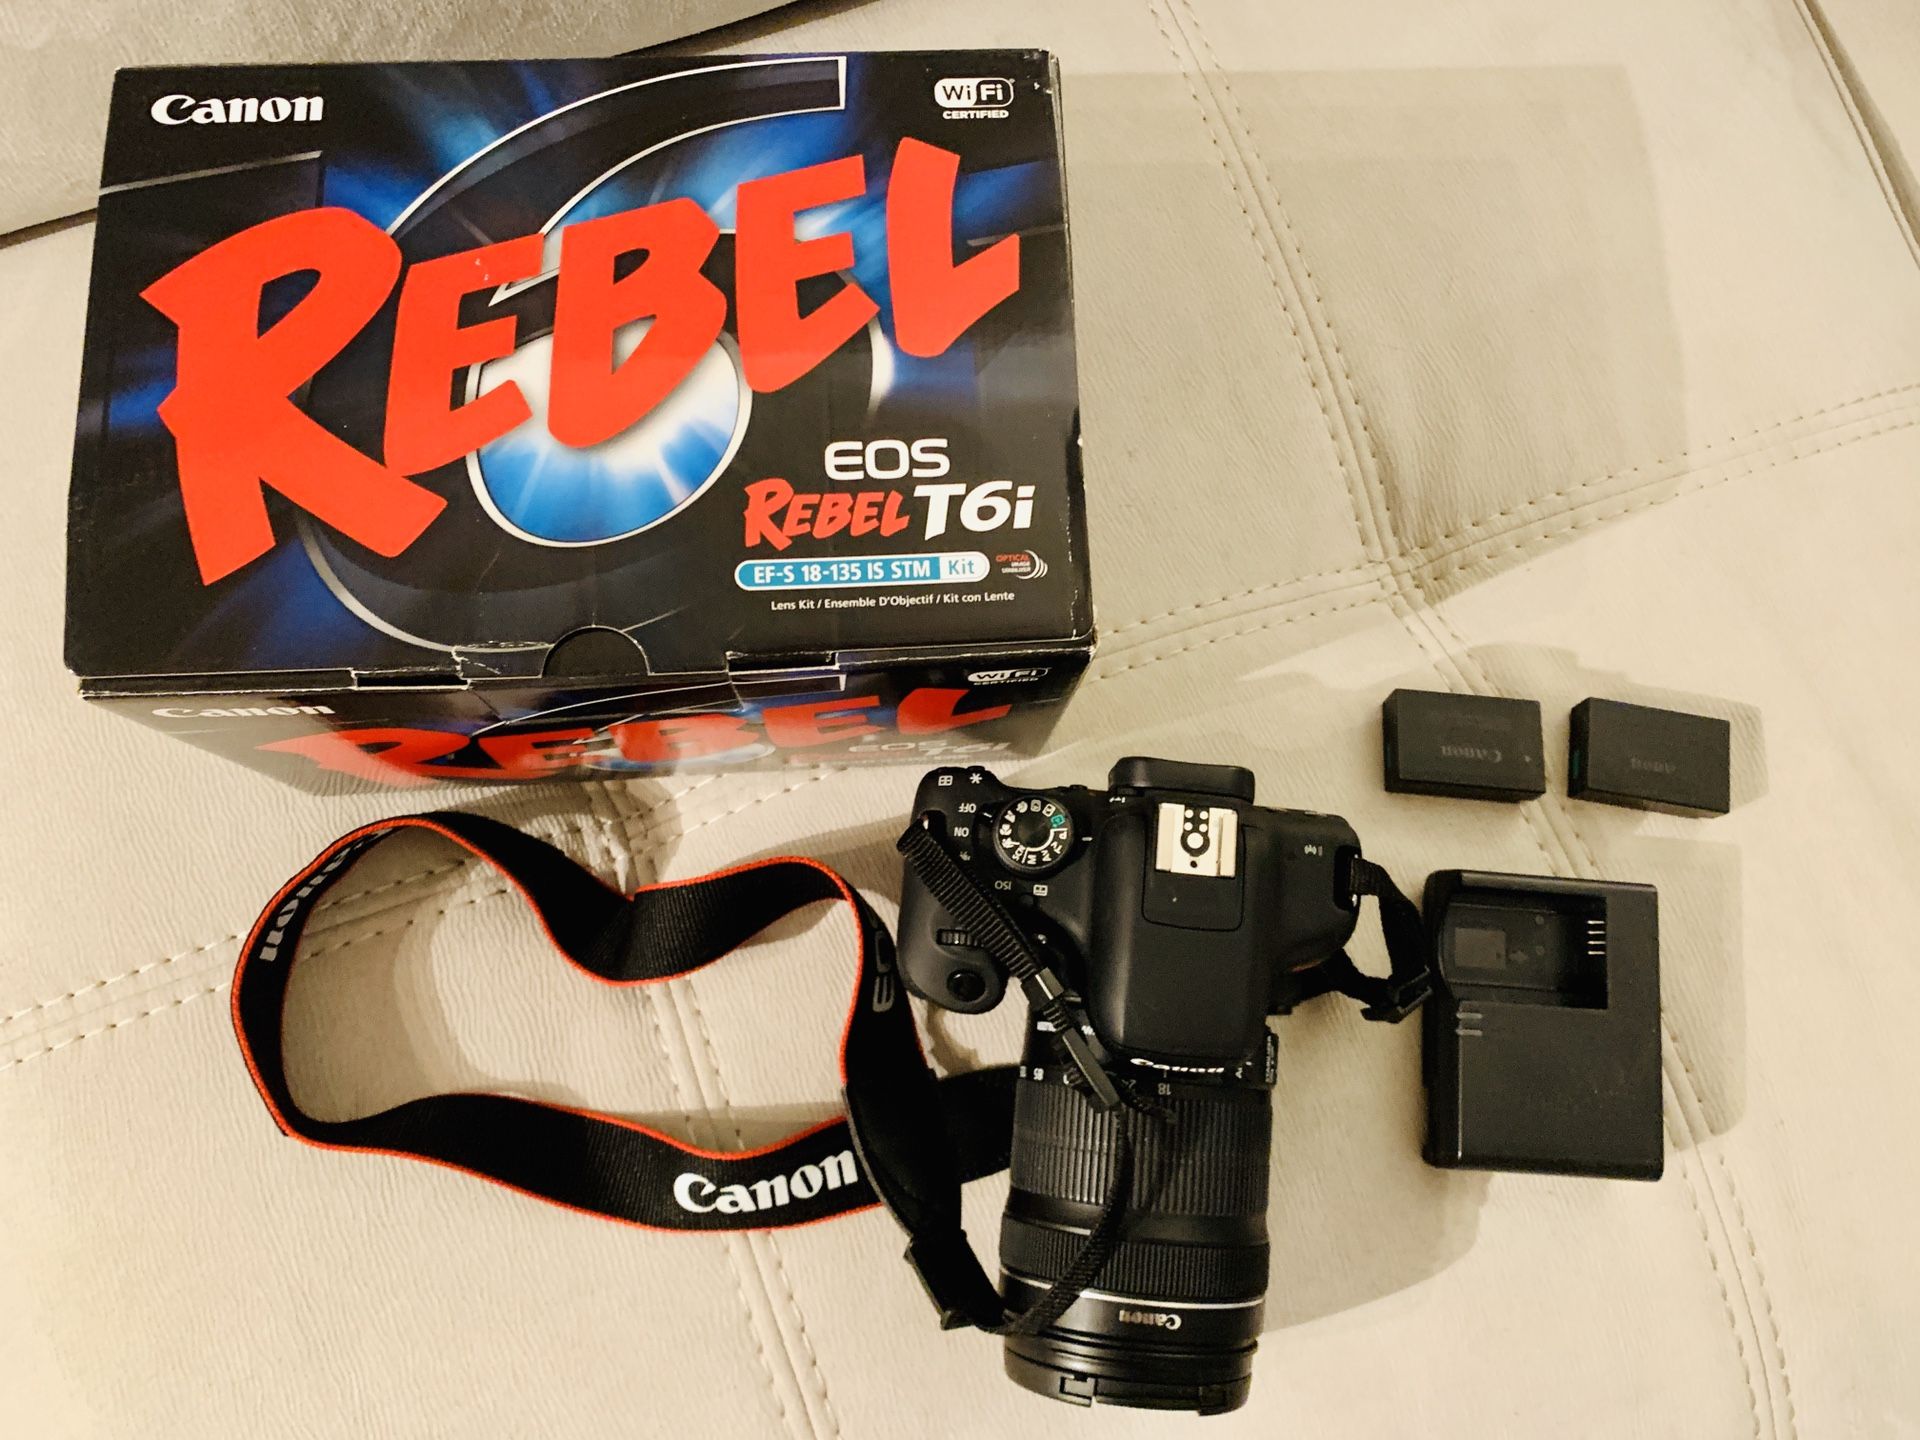 Canon Rebel T6i - Like new with box